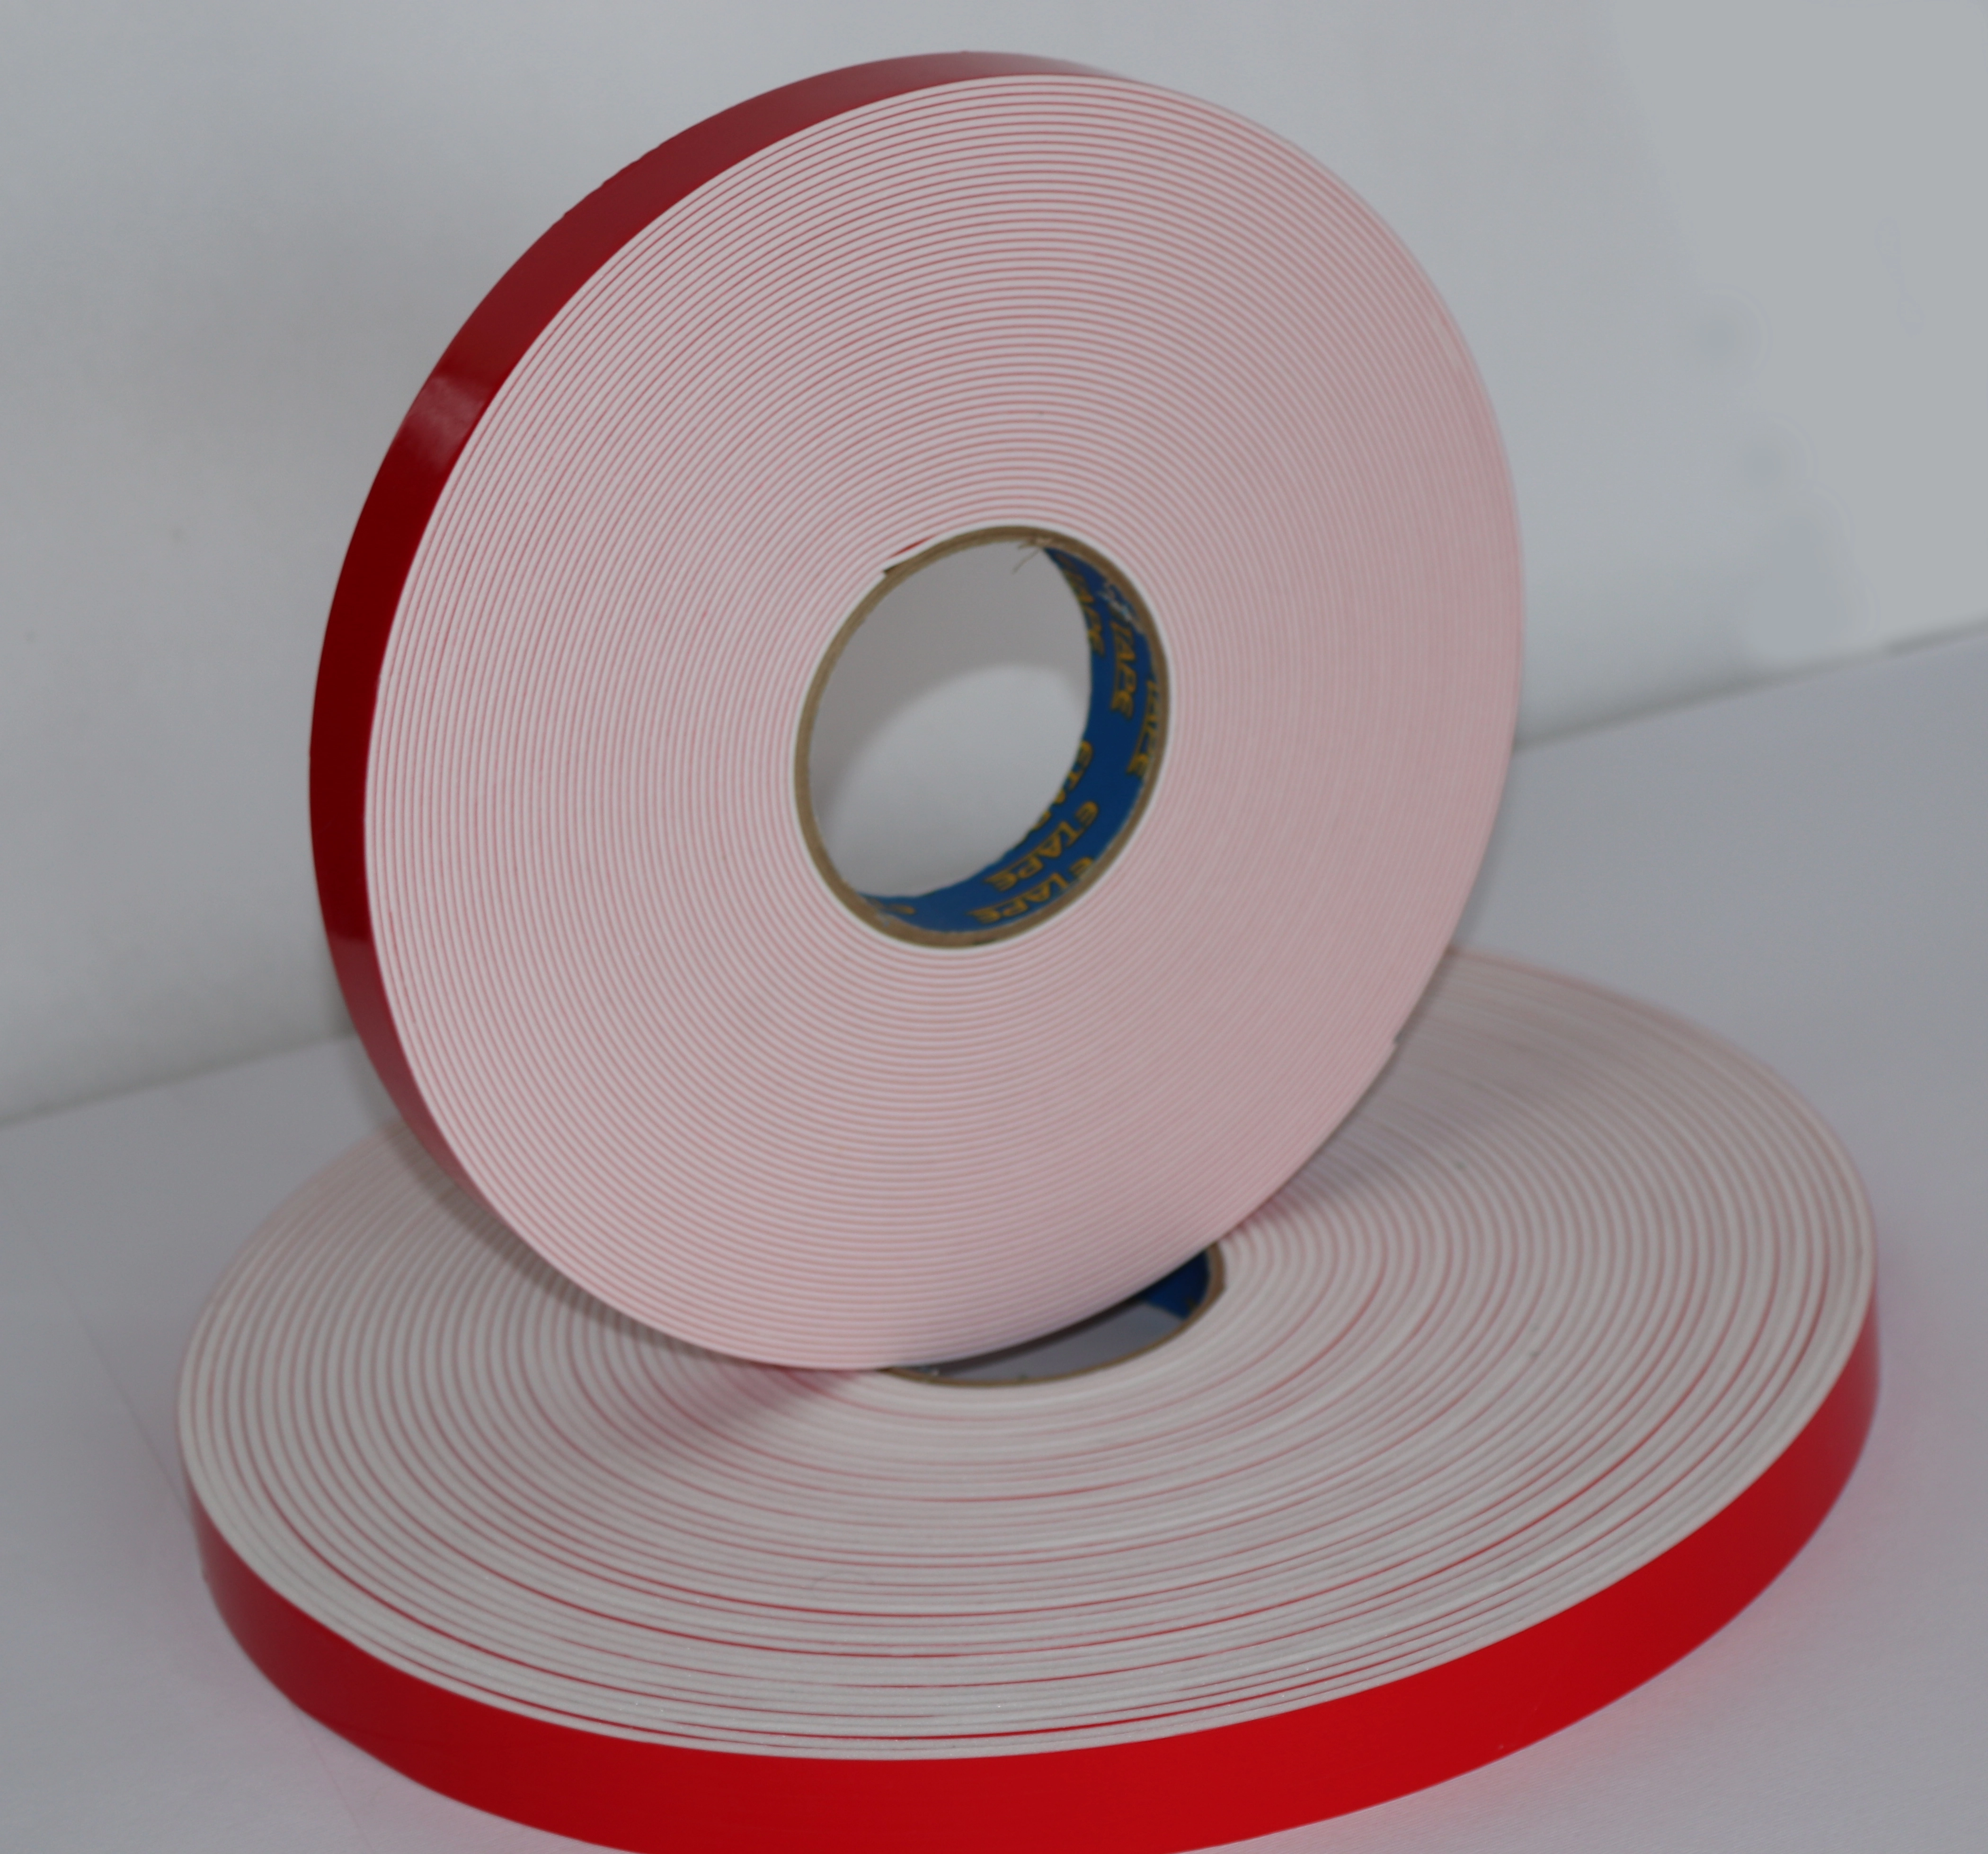 Double sided tape used for mounting or splicing sold by Easitape